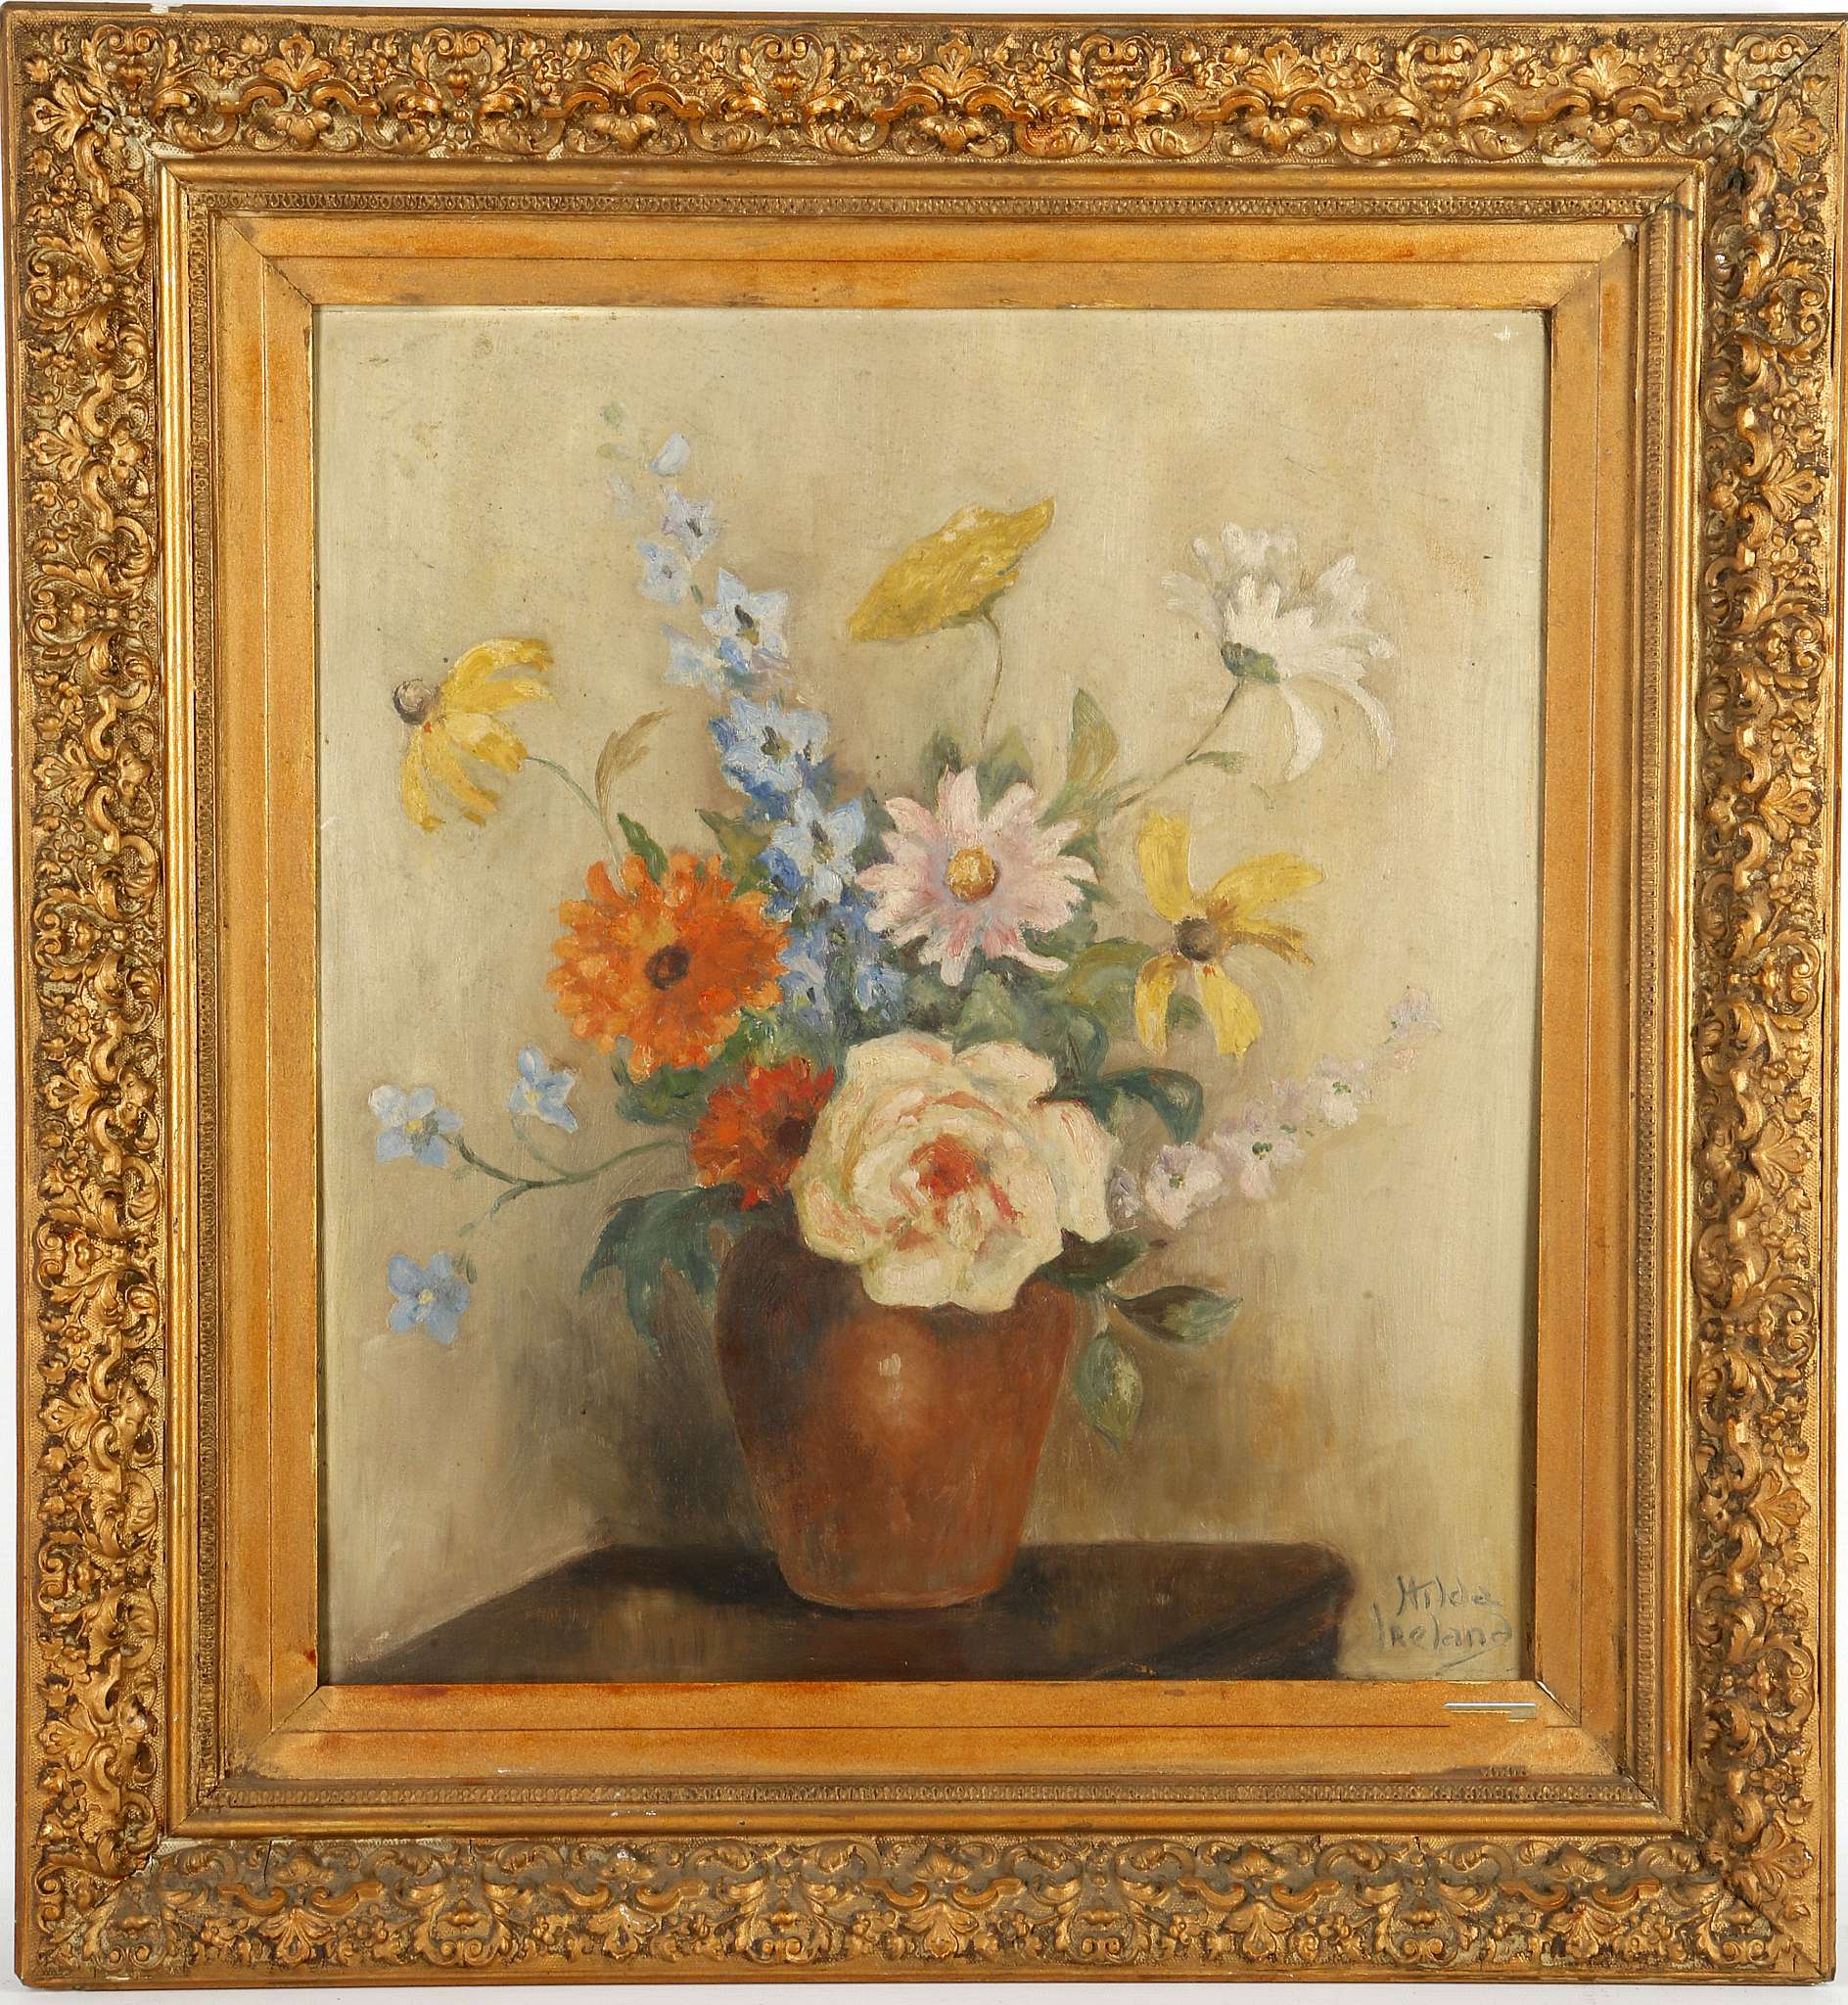 Hilda Ireland (1900-?), two oils on canvas and board, both still lives of flowers in a vase, - Image 4 of 6